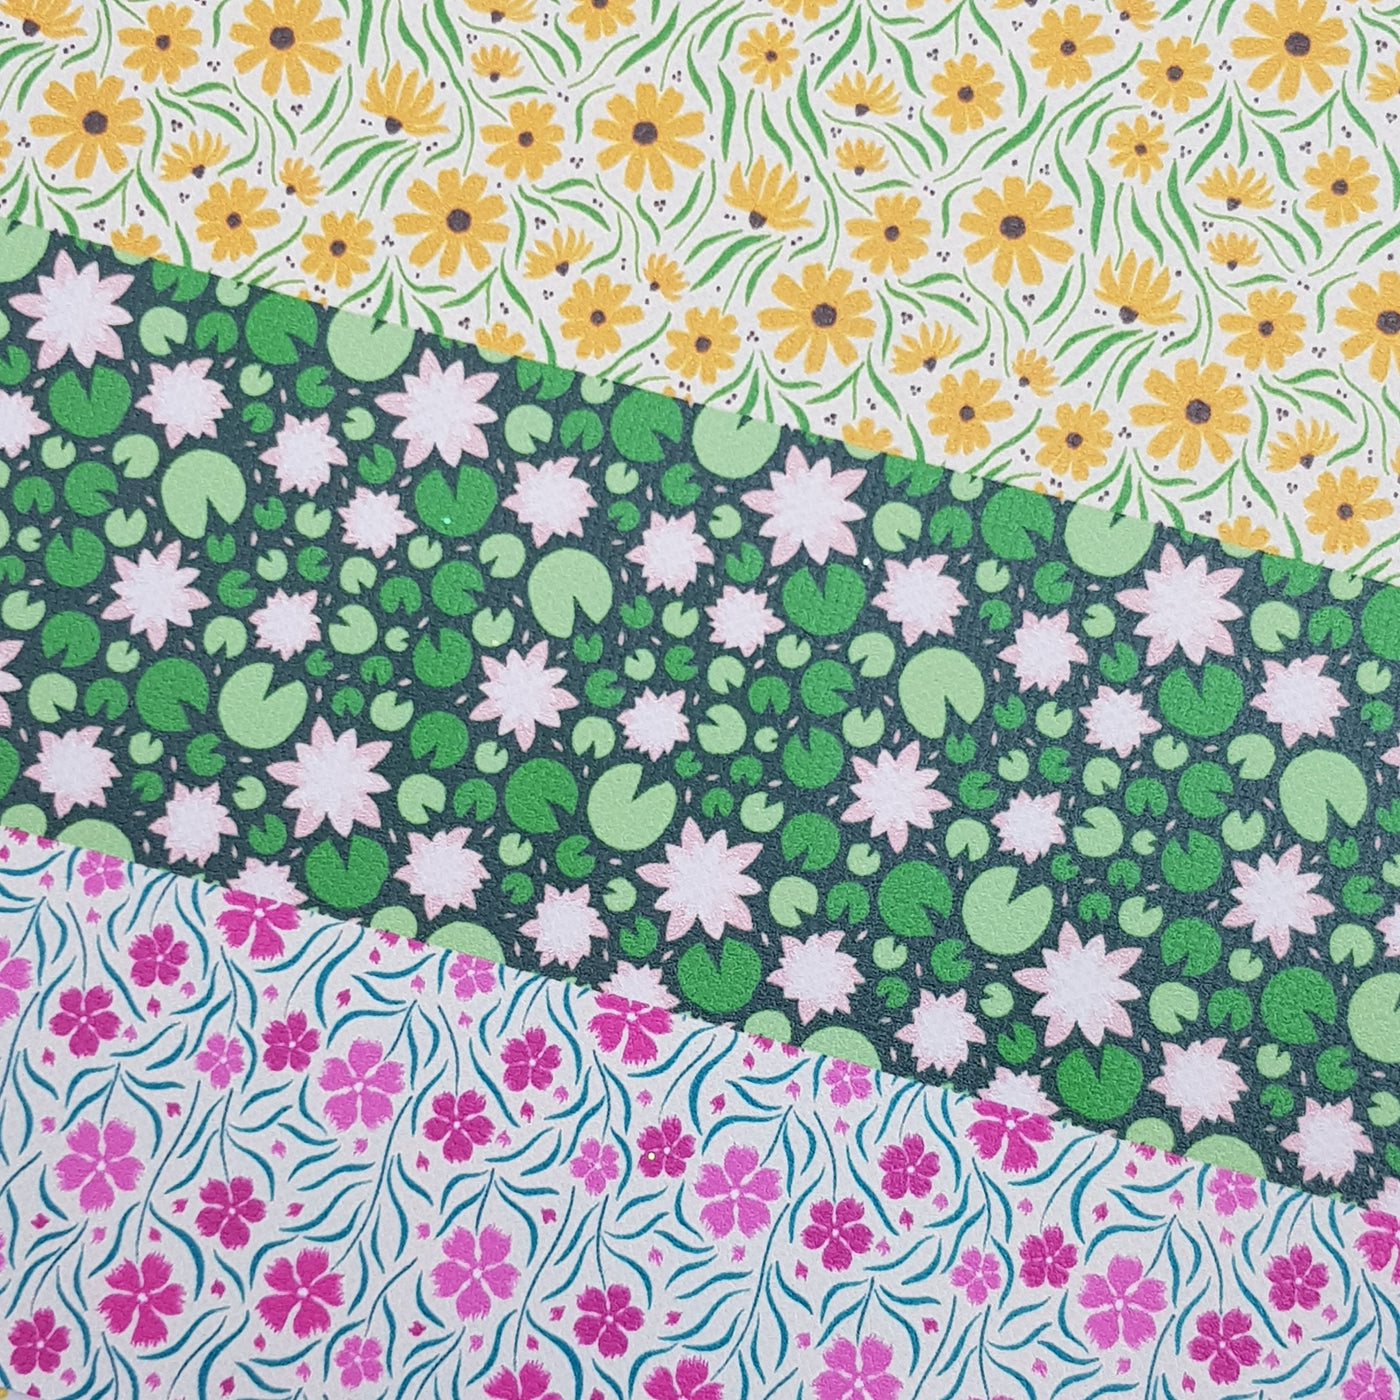 Flower floral liberty style  - faux vegan Leather vinyl - canvas - choose Fabric material Sheets